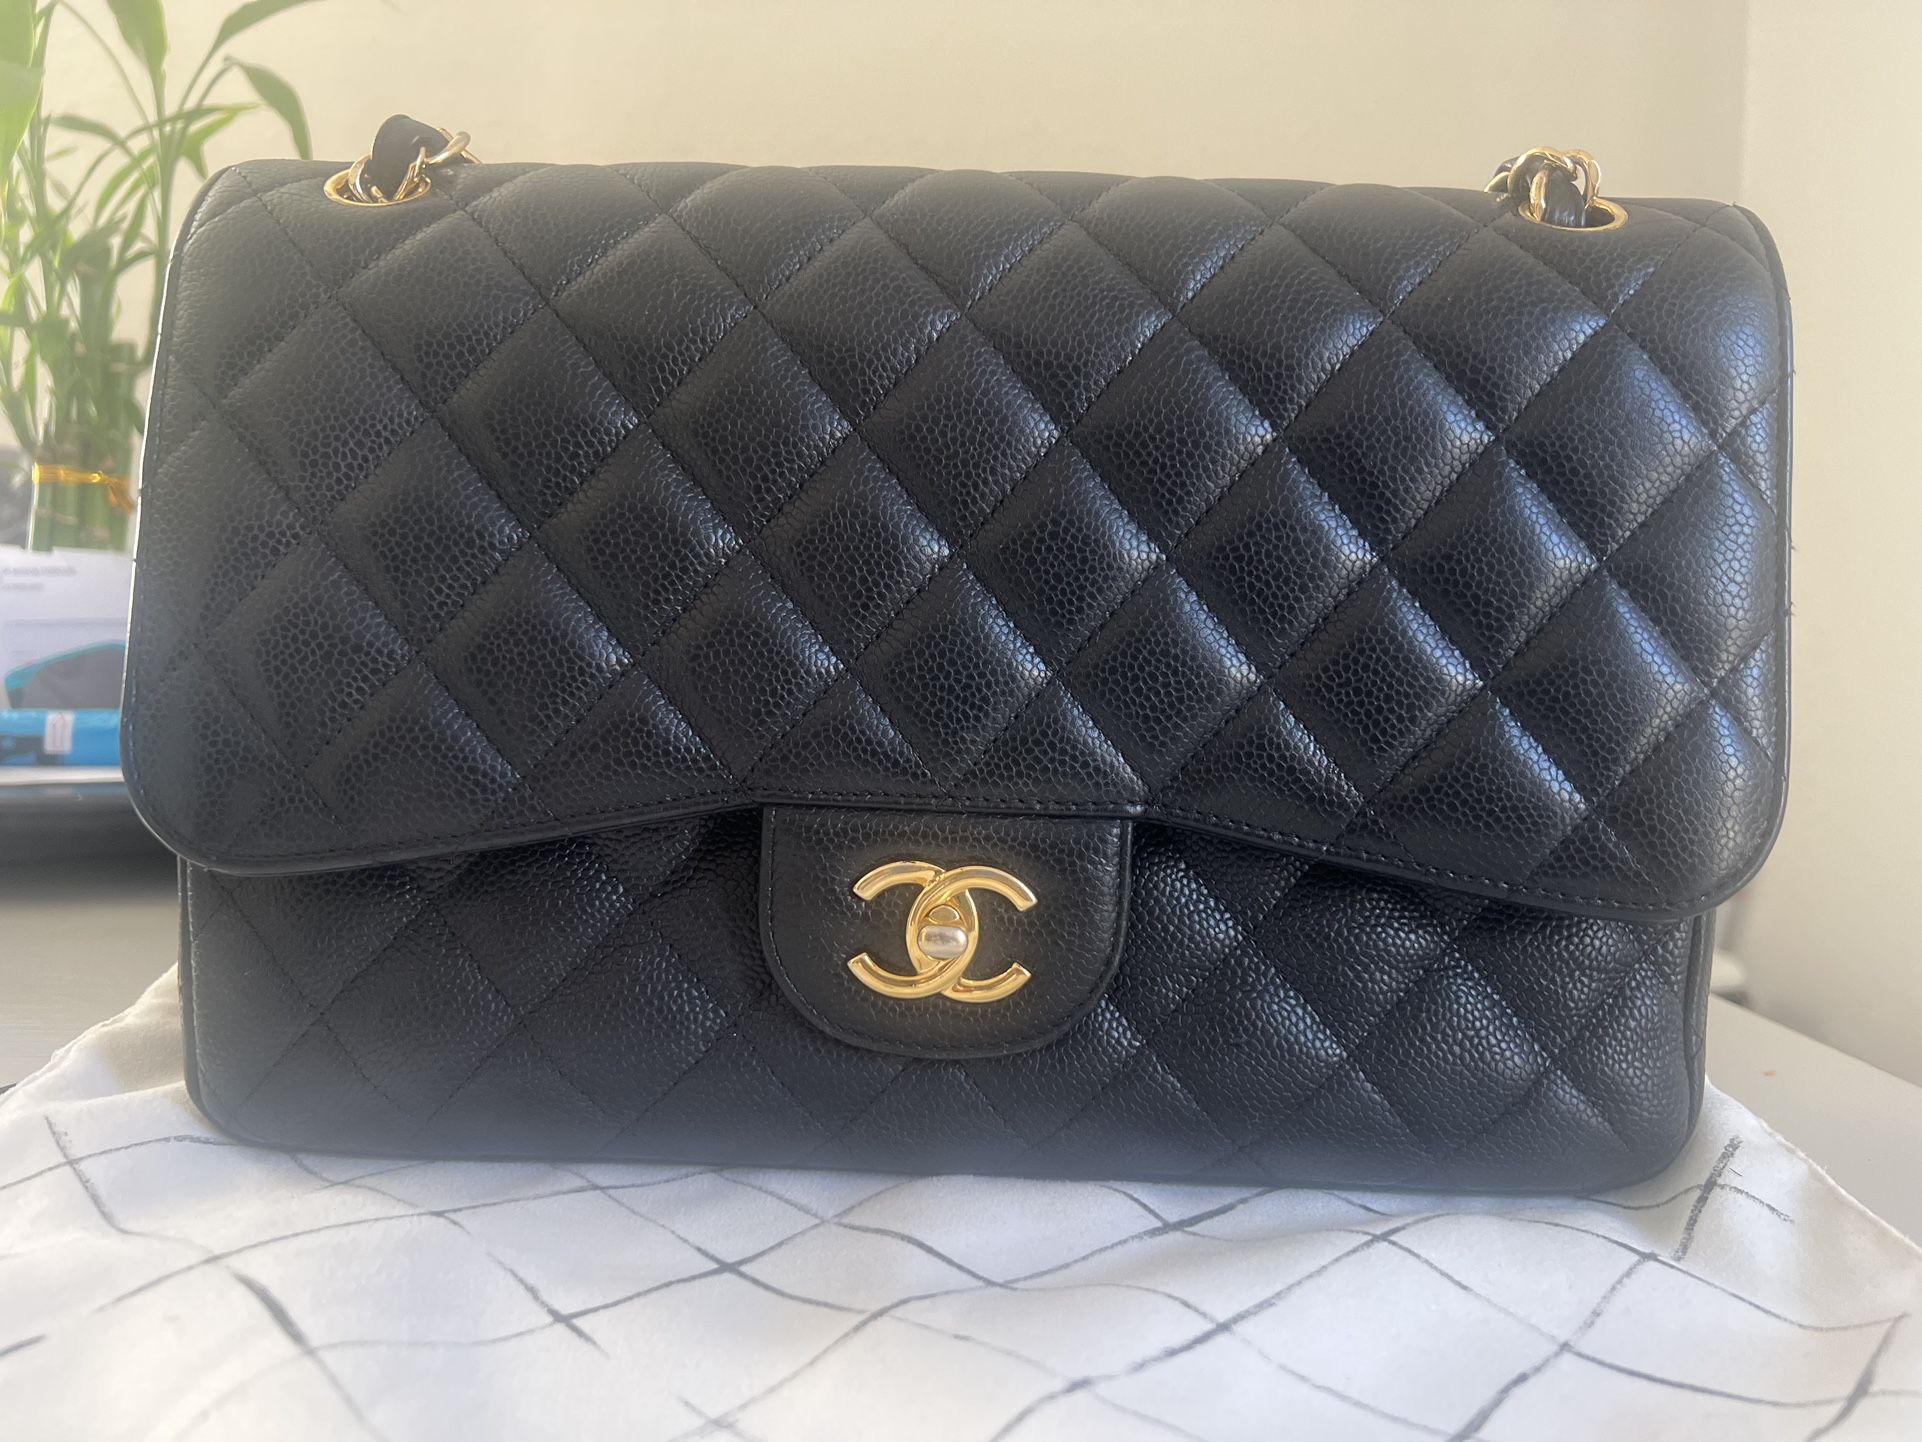 Authentic Chanel Double Flap Caviar Handbag for Sale in Cypress